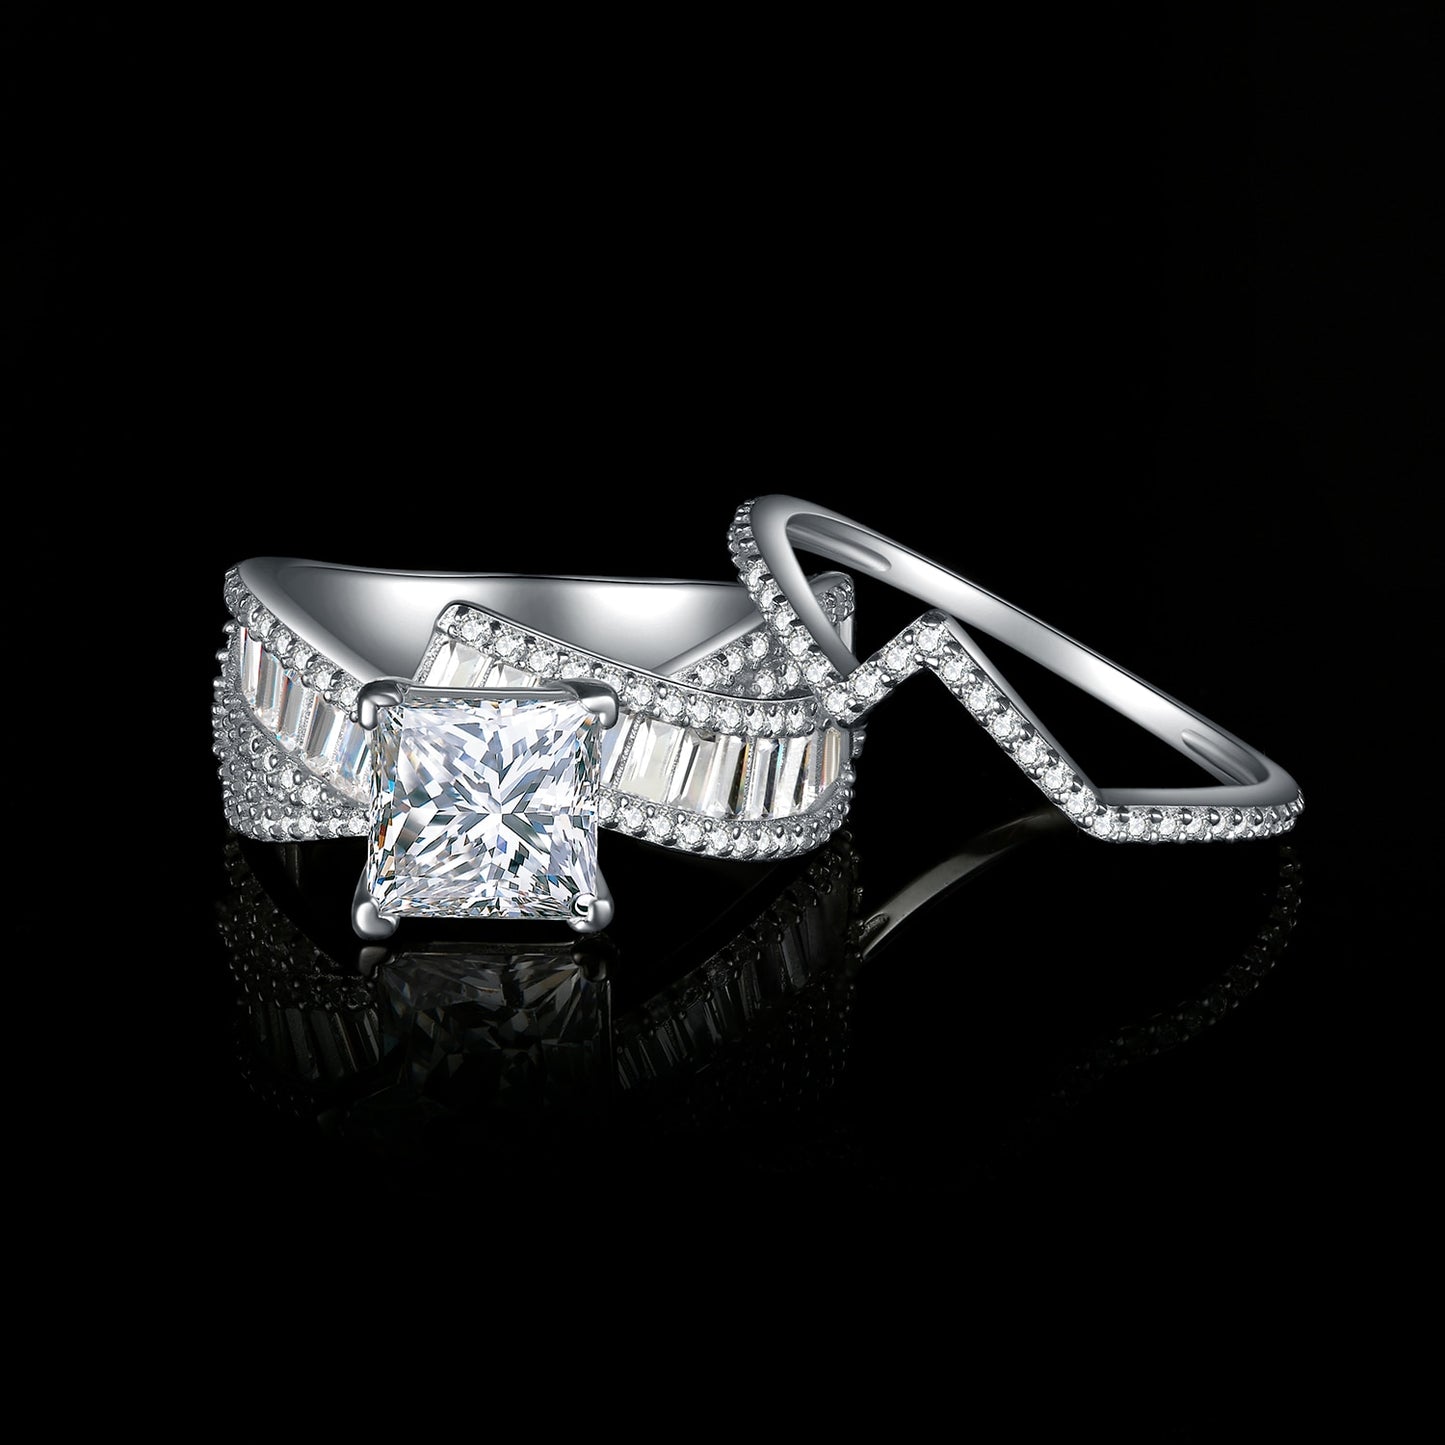 TrophyWife Collection | 2Pcs Silver 3.4ct Simulated Diamond Bridal Sets 2